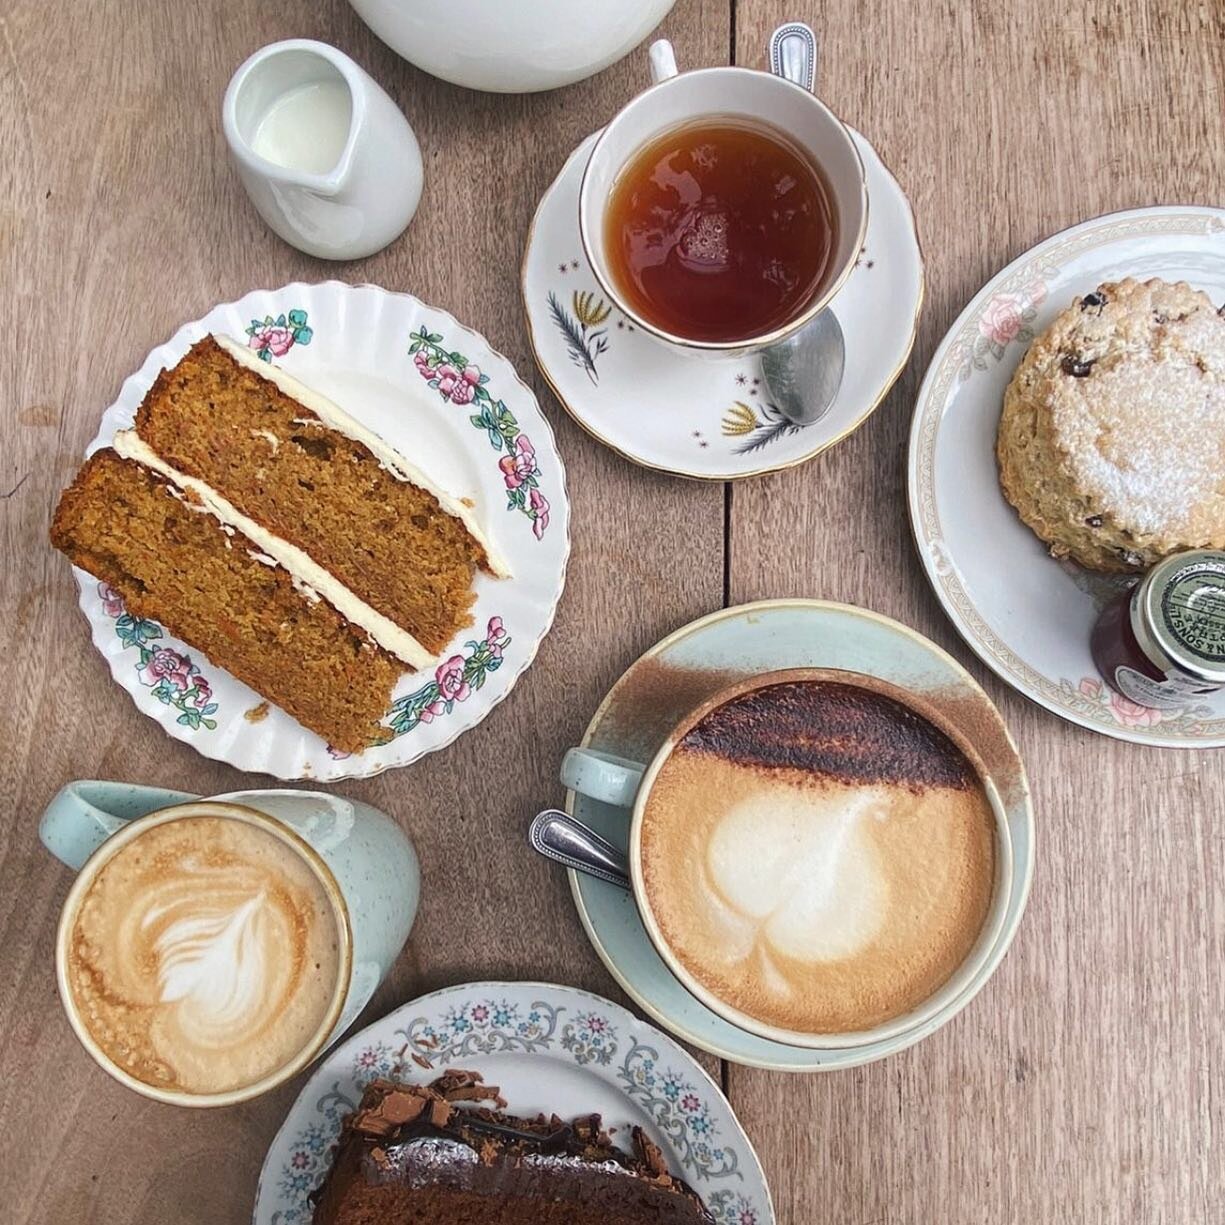 sᴡᴇᴇᴛ ᴀғᴛᴇʀɴᴏᴏɴs.

Coffee, cakes and afternoons with friends. The perfect way to spend the day 🤎
.
.
.
.
.

#wyresdale #wyresdalepark #visitwyresdalepark #applestore #applestorecafe #cafe #yum #visit #dineout #brunch #brunchspot #lunch #lunchspot #l